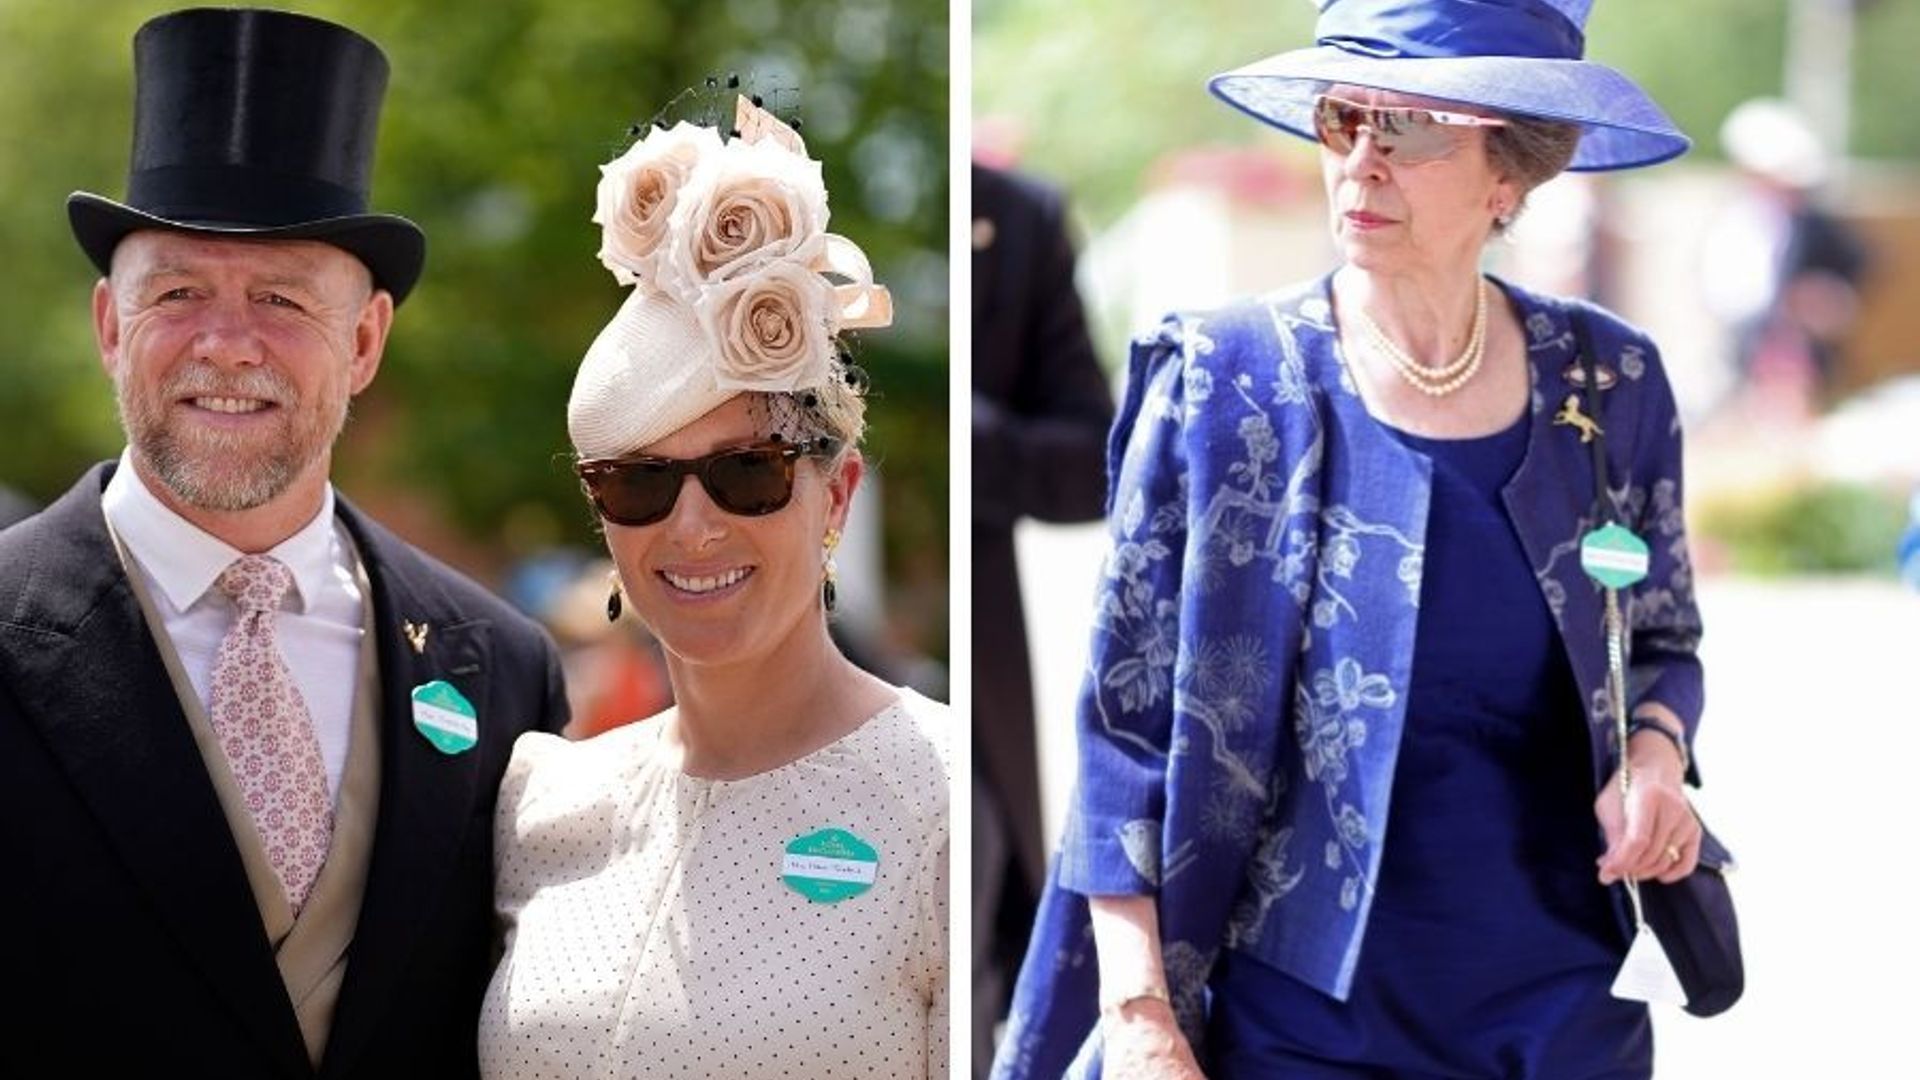 Princess Anne, Duchess Camilla, Zara Tindall and Countess Sophie step out for day one of Royal Ascot 2021